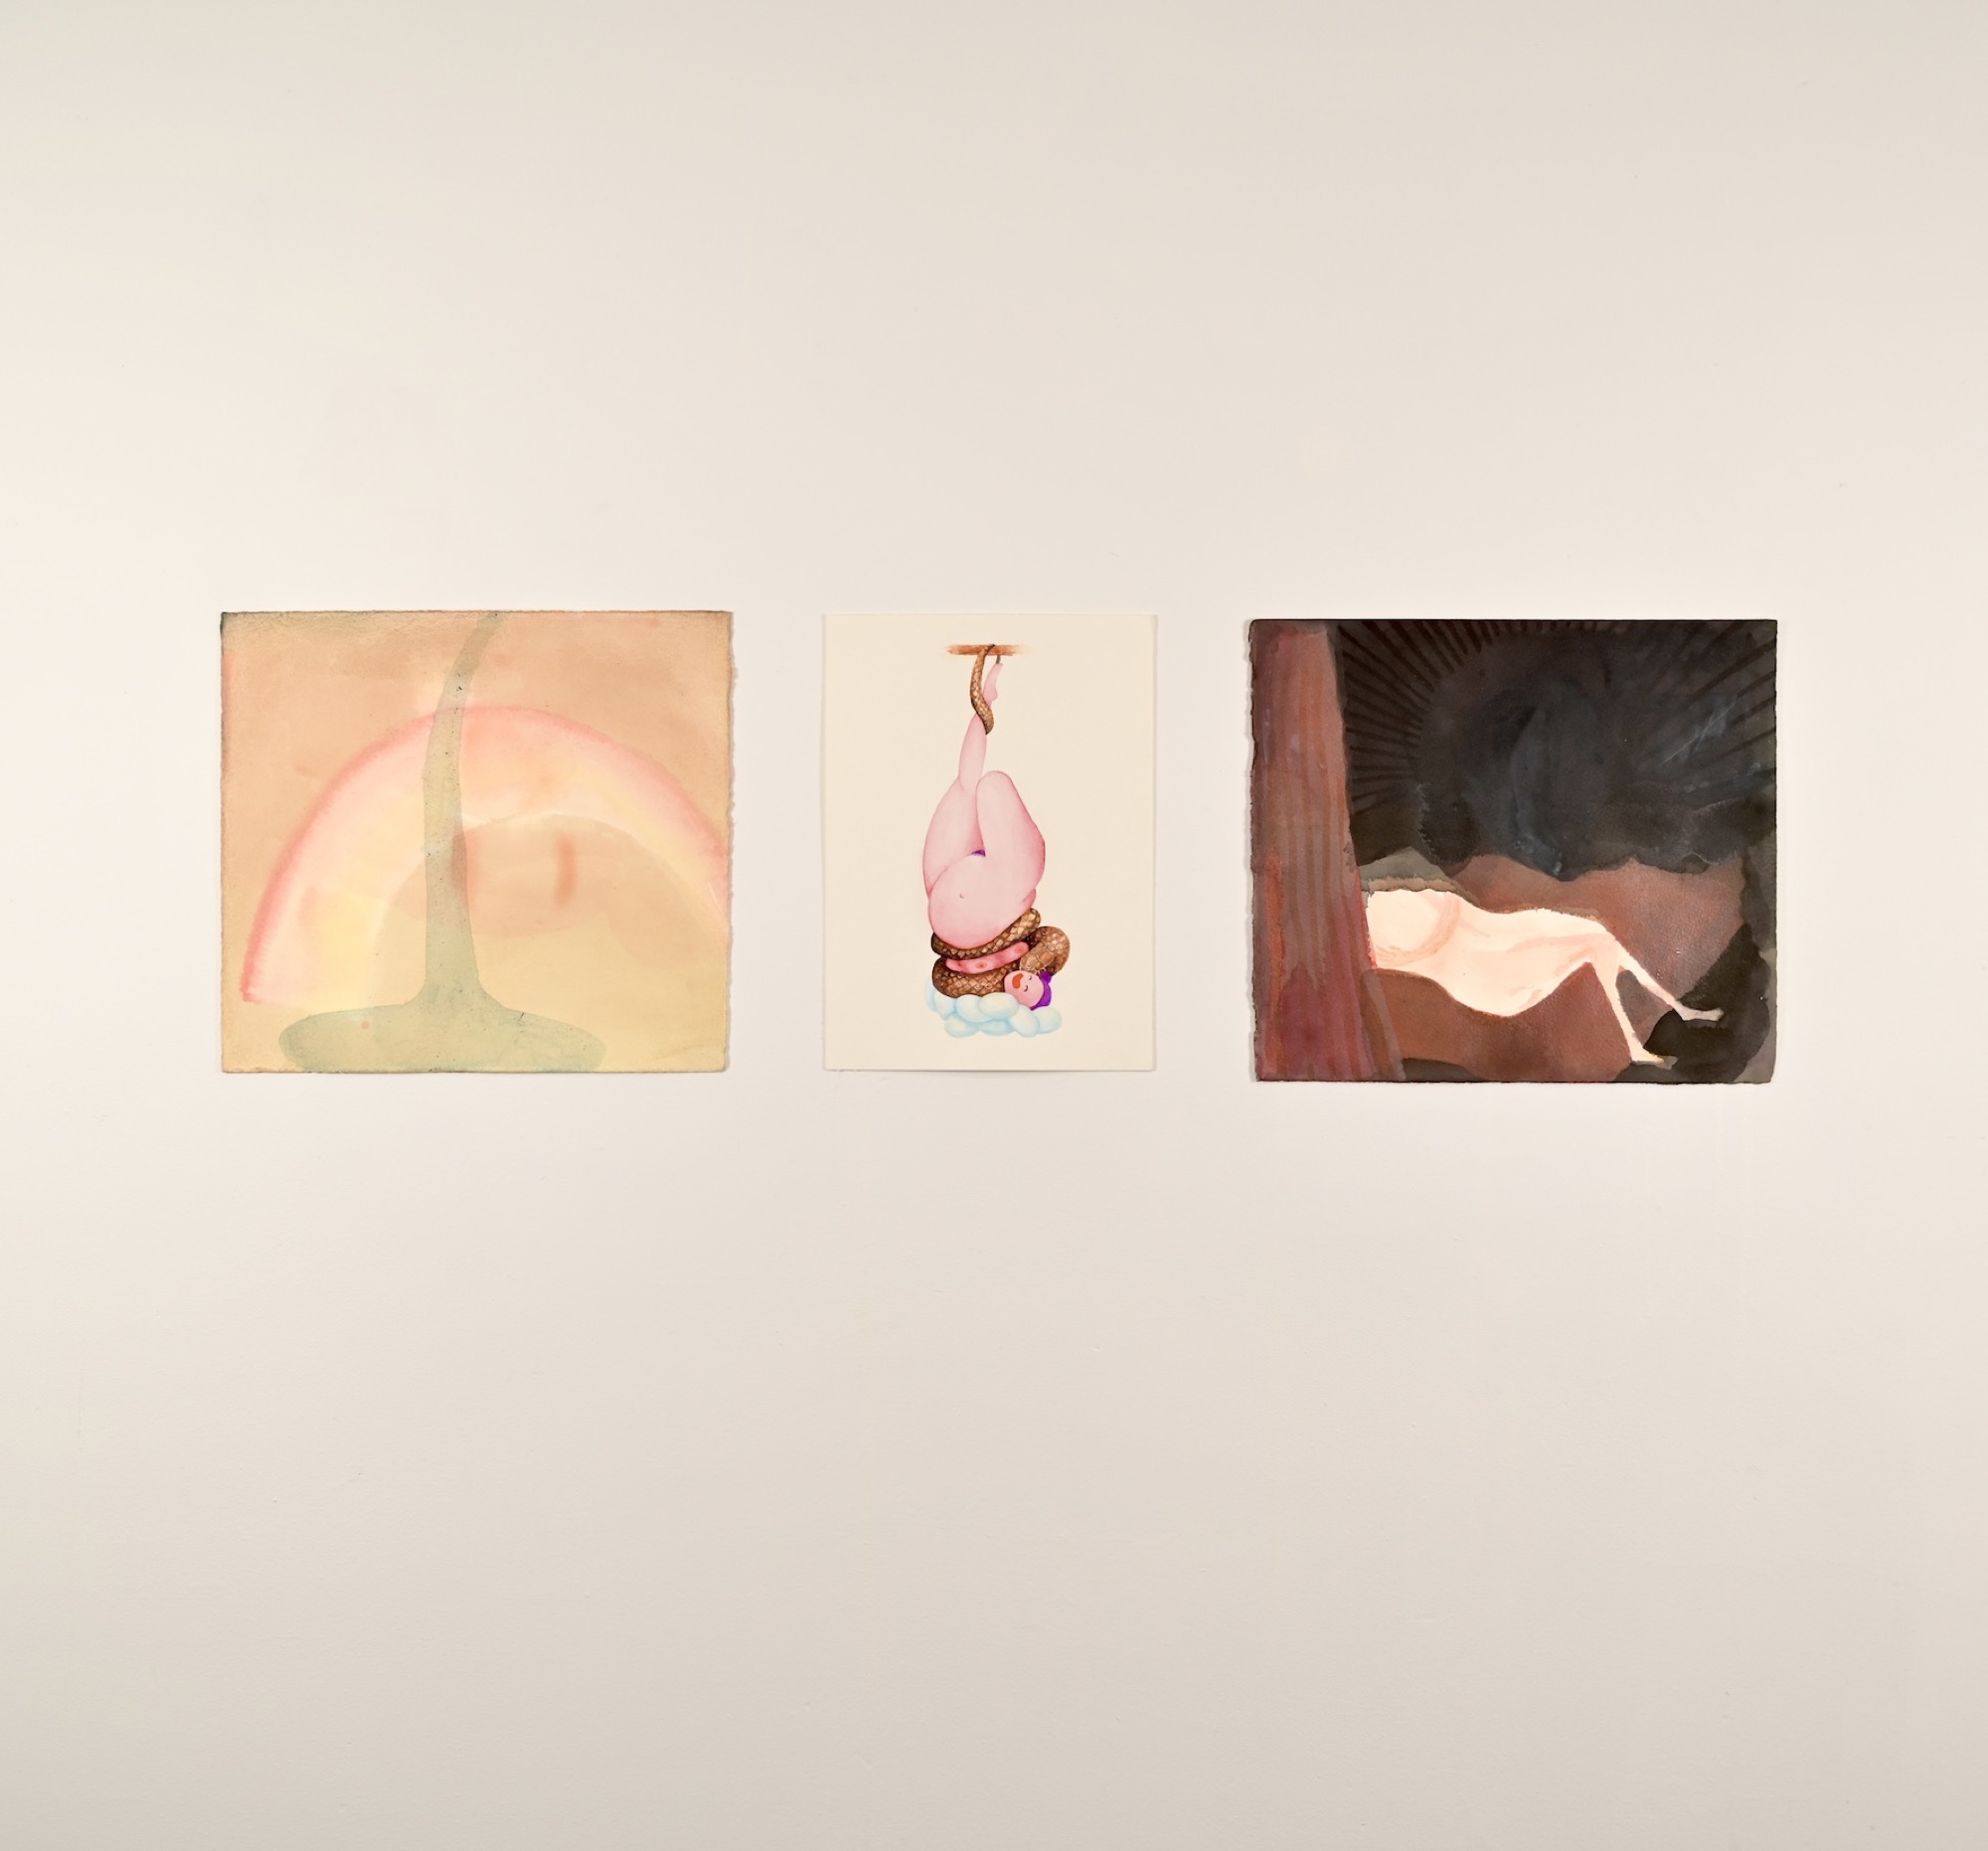 (L-R) Inbal Nissim, LABrINTO, 2019, ink on paper, 25 x 28cm; Noriko Nakamura, Snake Lover, 2020, watercolour on paper, 25 X 18cm; Inbal Nissim, LABrINTO, 2019, ink on paper, 25 x 28cm. Courtesy the artists and Caves.